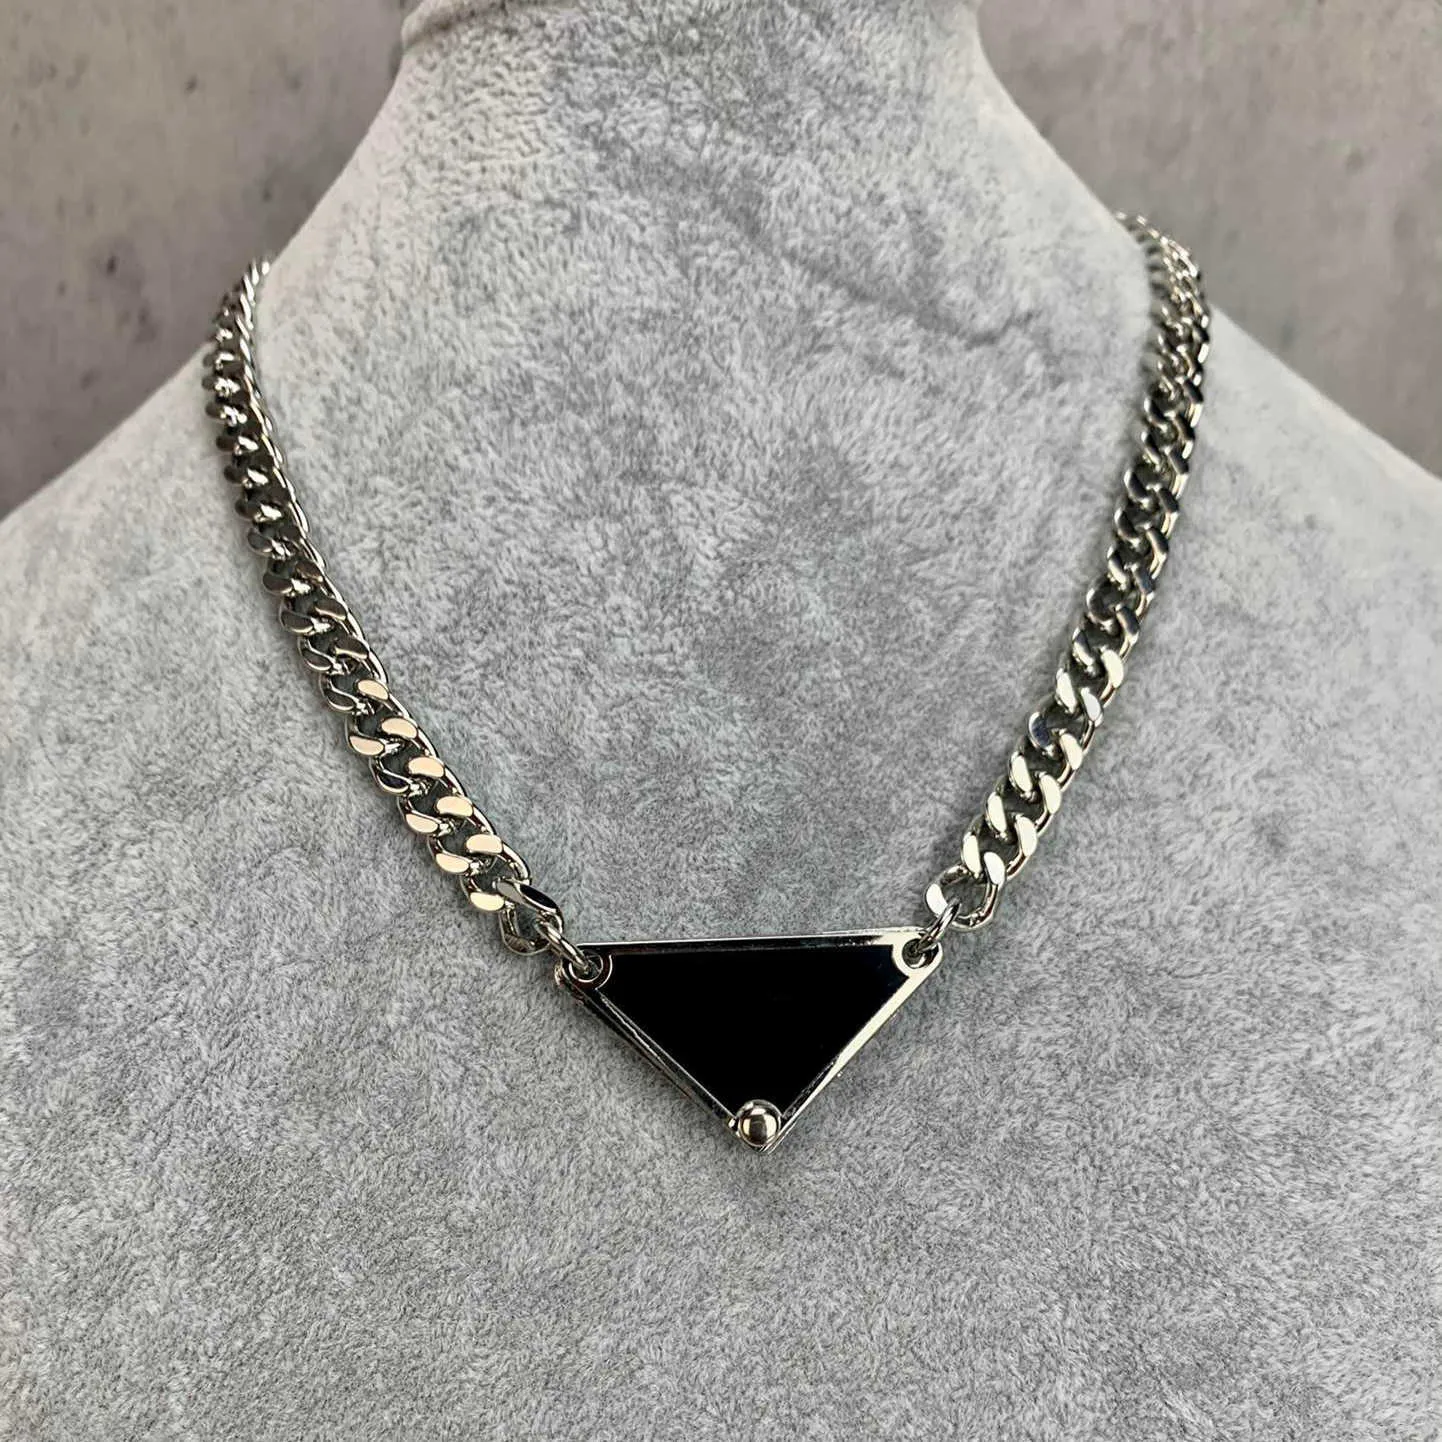 Brand Fashion Jewelry Black Triangle Thick Chain Pink White Pendant Luck Steam Punk Design Hiphop Choker Men Unisex Jewelry5490197